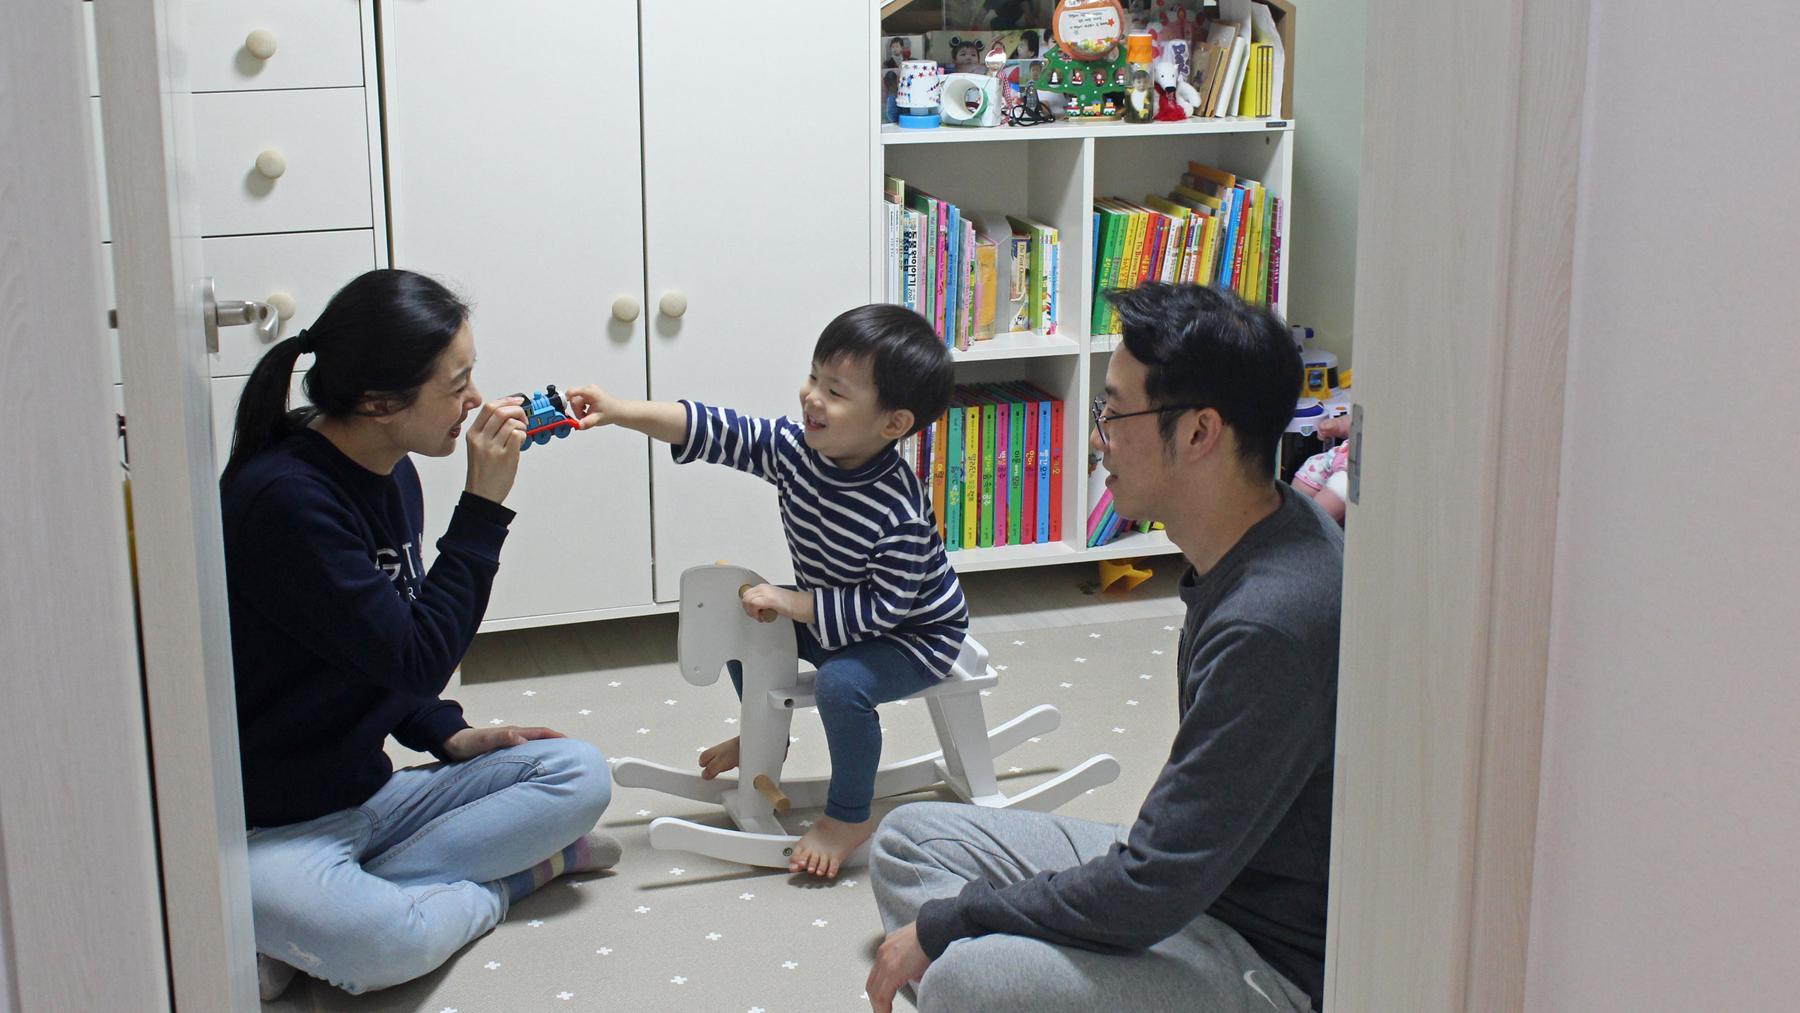 Seo Ji-hye and Cho Sung-won watch as their two-year-old son, Han-sol, plays with a toy train in his bedroom in Seoul.